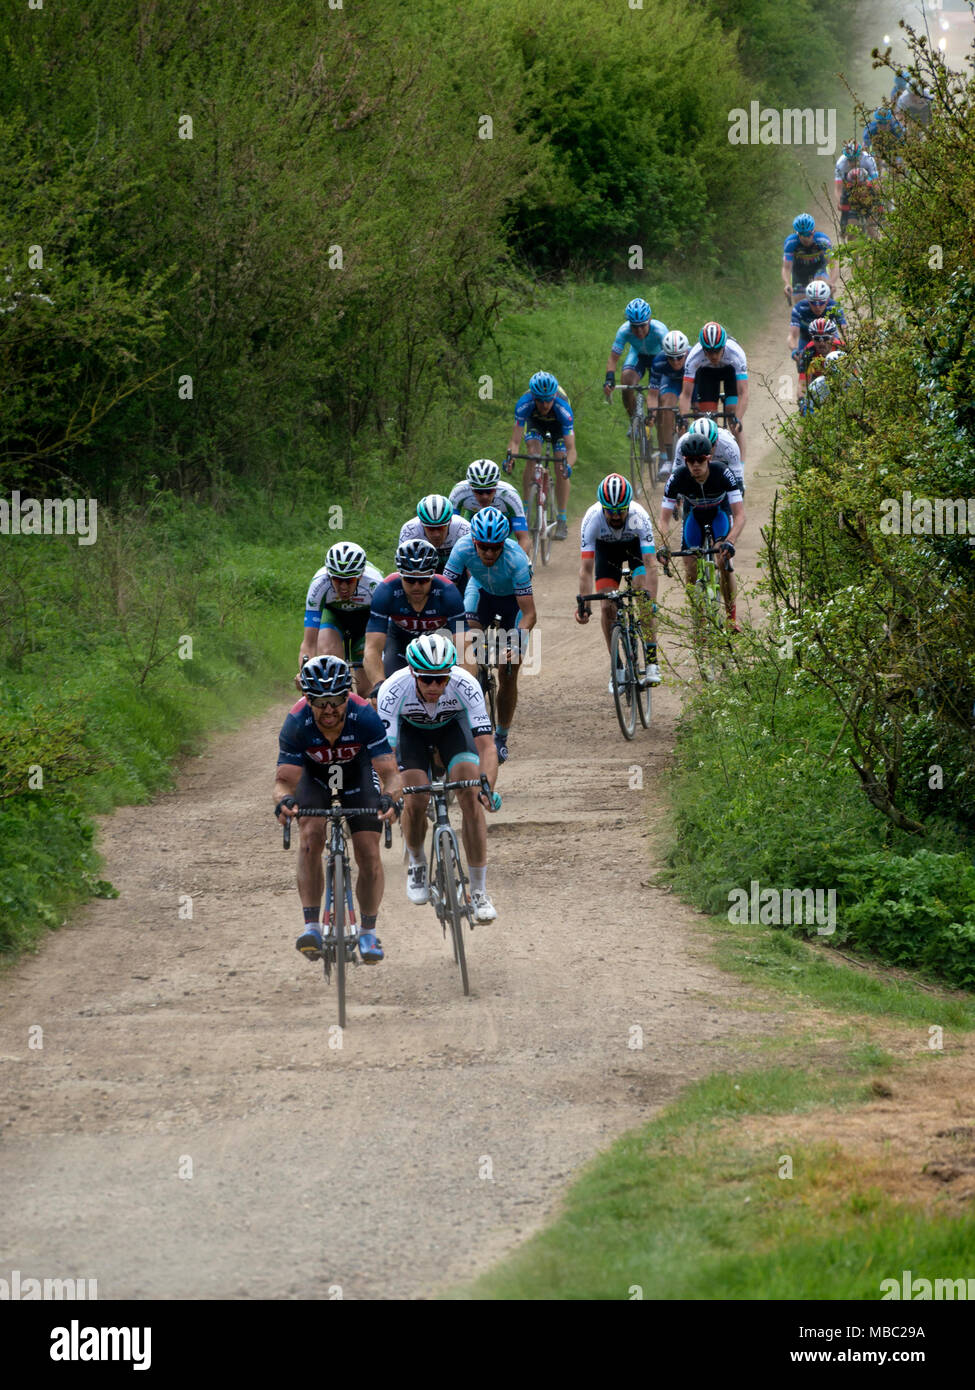 Competitors in the 2017 International CiCLE Classic Cycle Race on the Sawgate Lane off-road section, Melton Mowbray, Leicestershire, England, UK Stock Photo